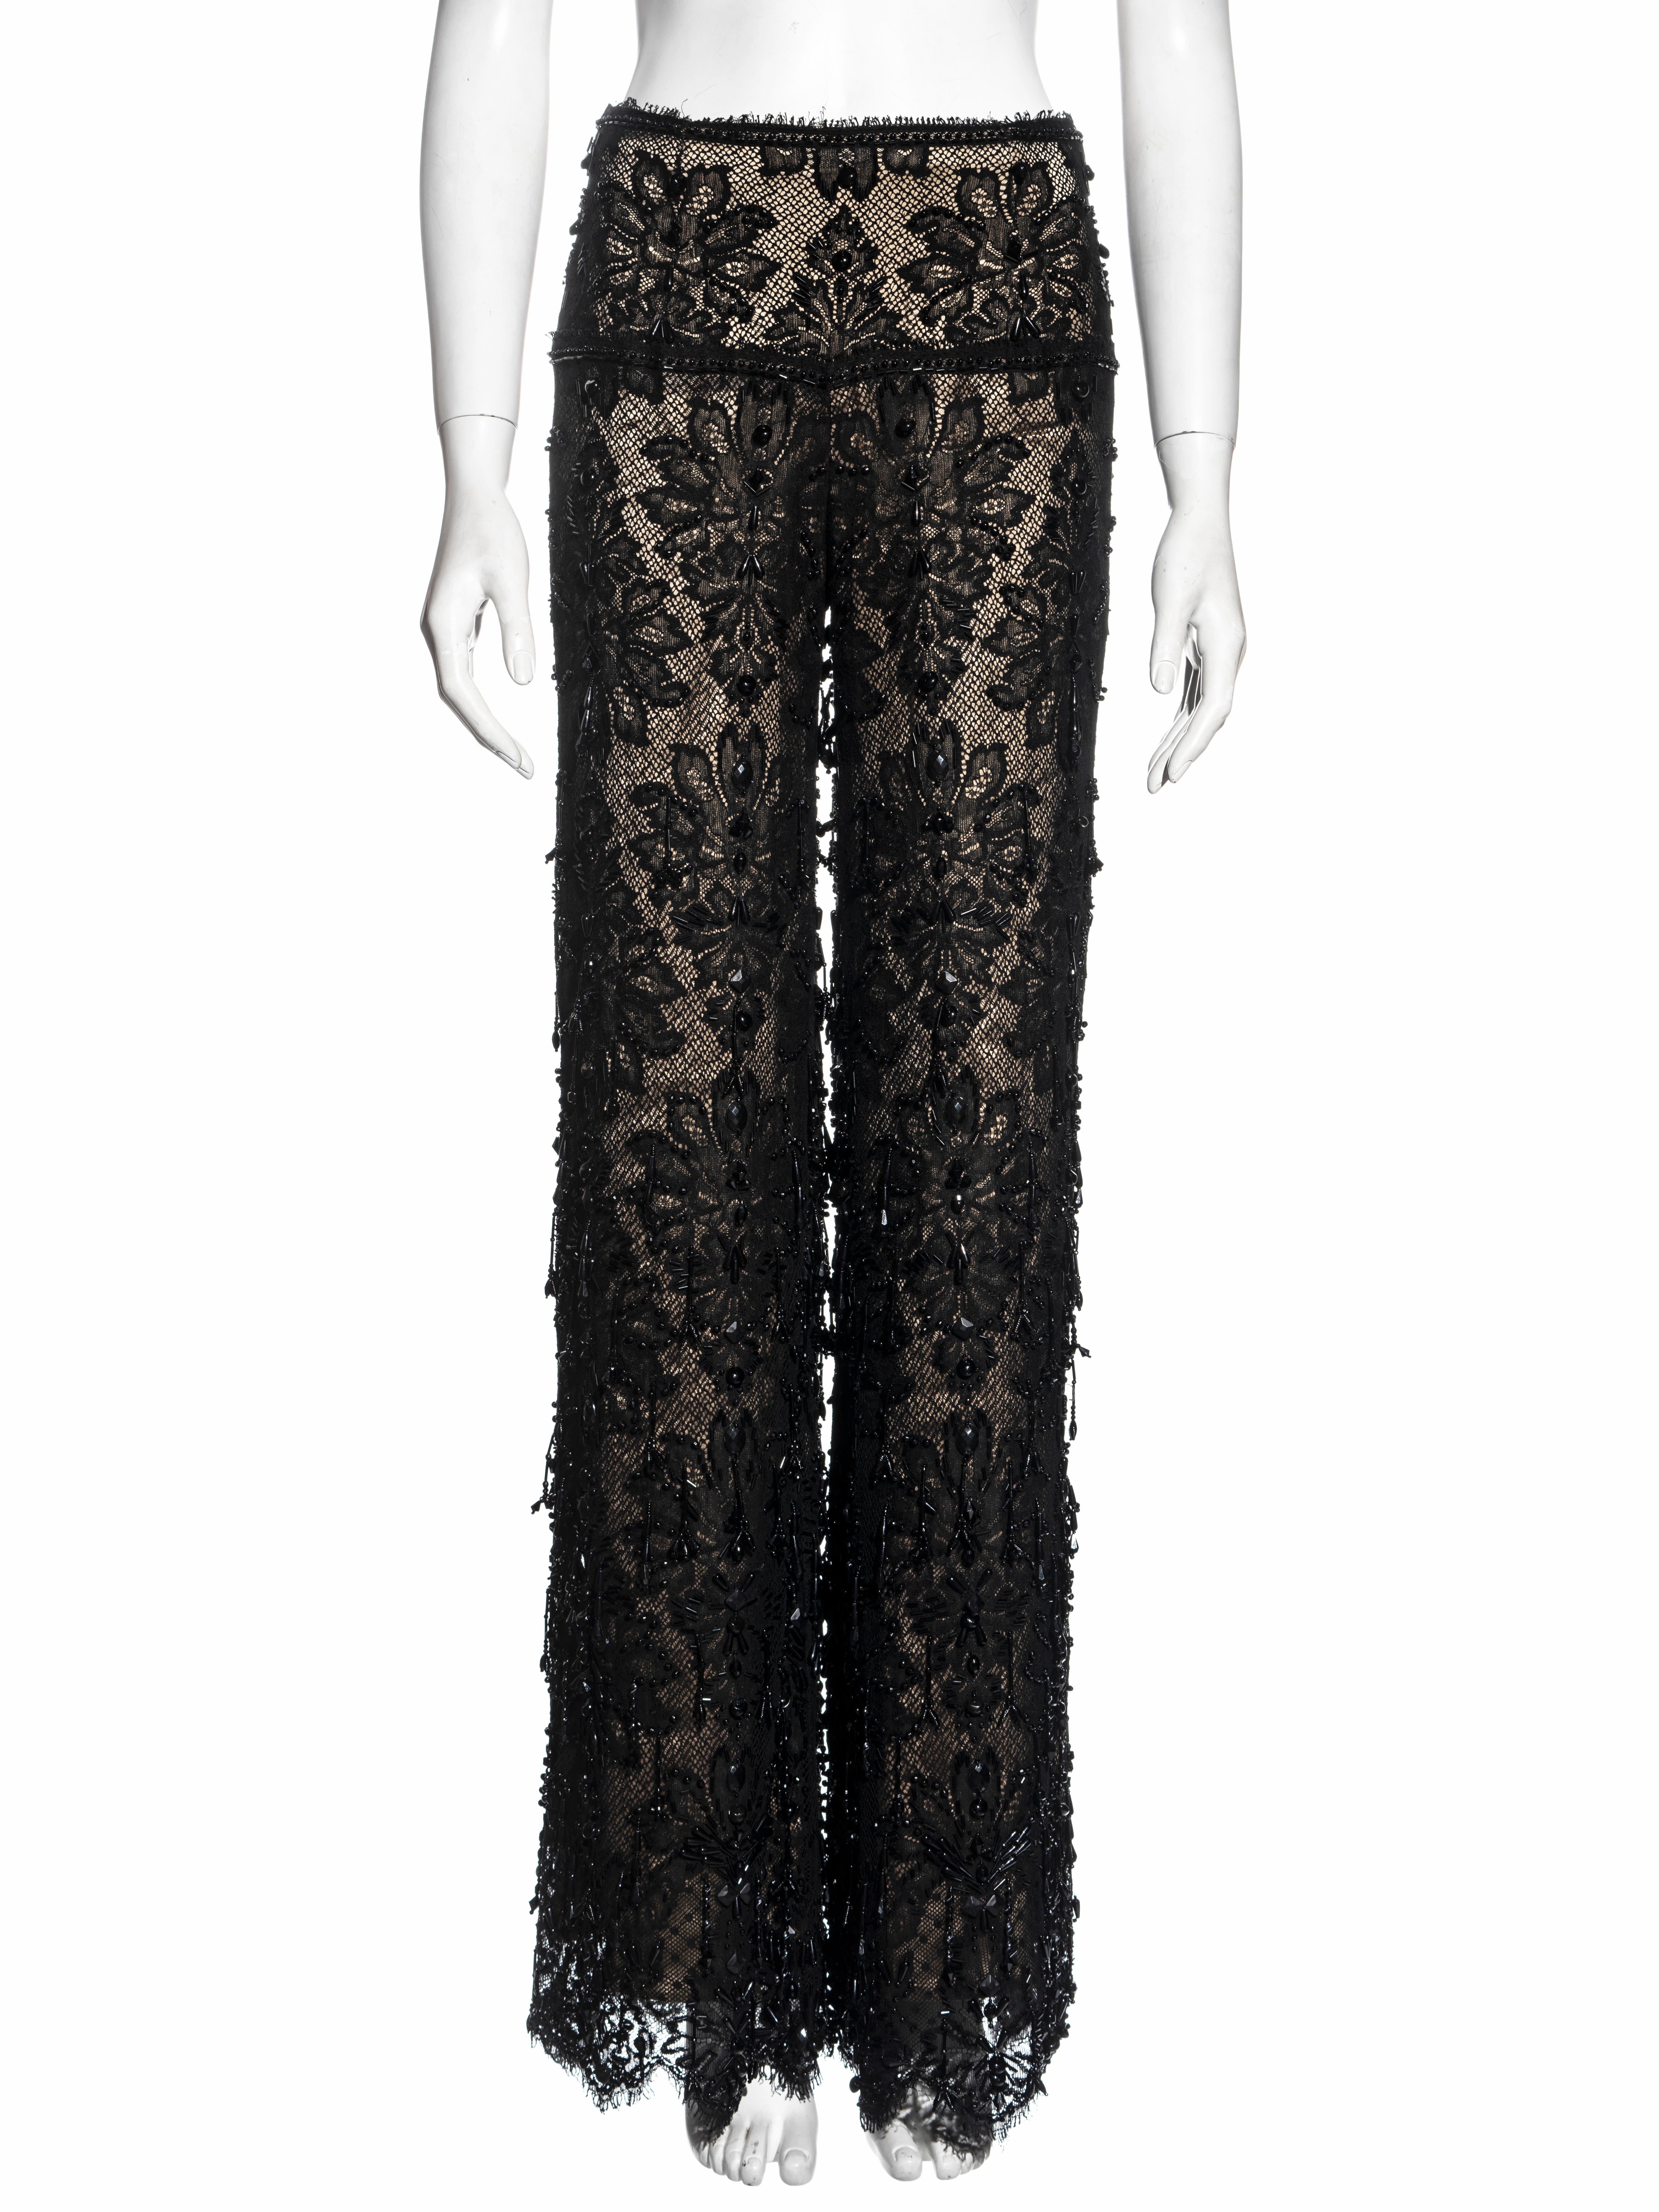 ▪ Gianfranco Ferré black lace evening pants
▪ French lace
▪ Black beading throughout  
▪ Wide-leg 
▪ Nude silk lining 
▪ IT 42 - FR 38 - UK 10 - US 6
▪ Spring-Summer 2002
▪ Made in Italy